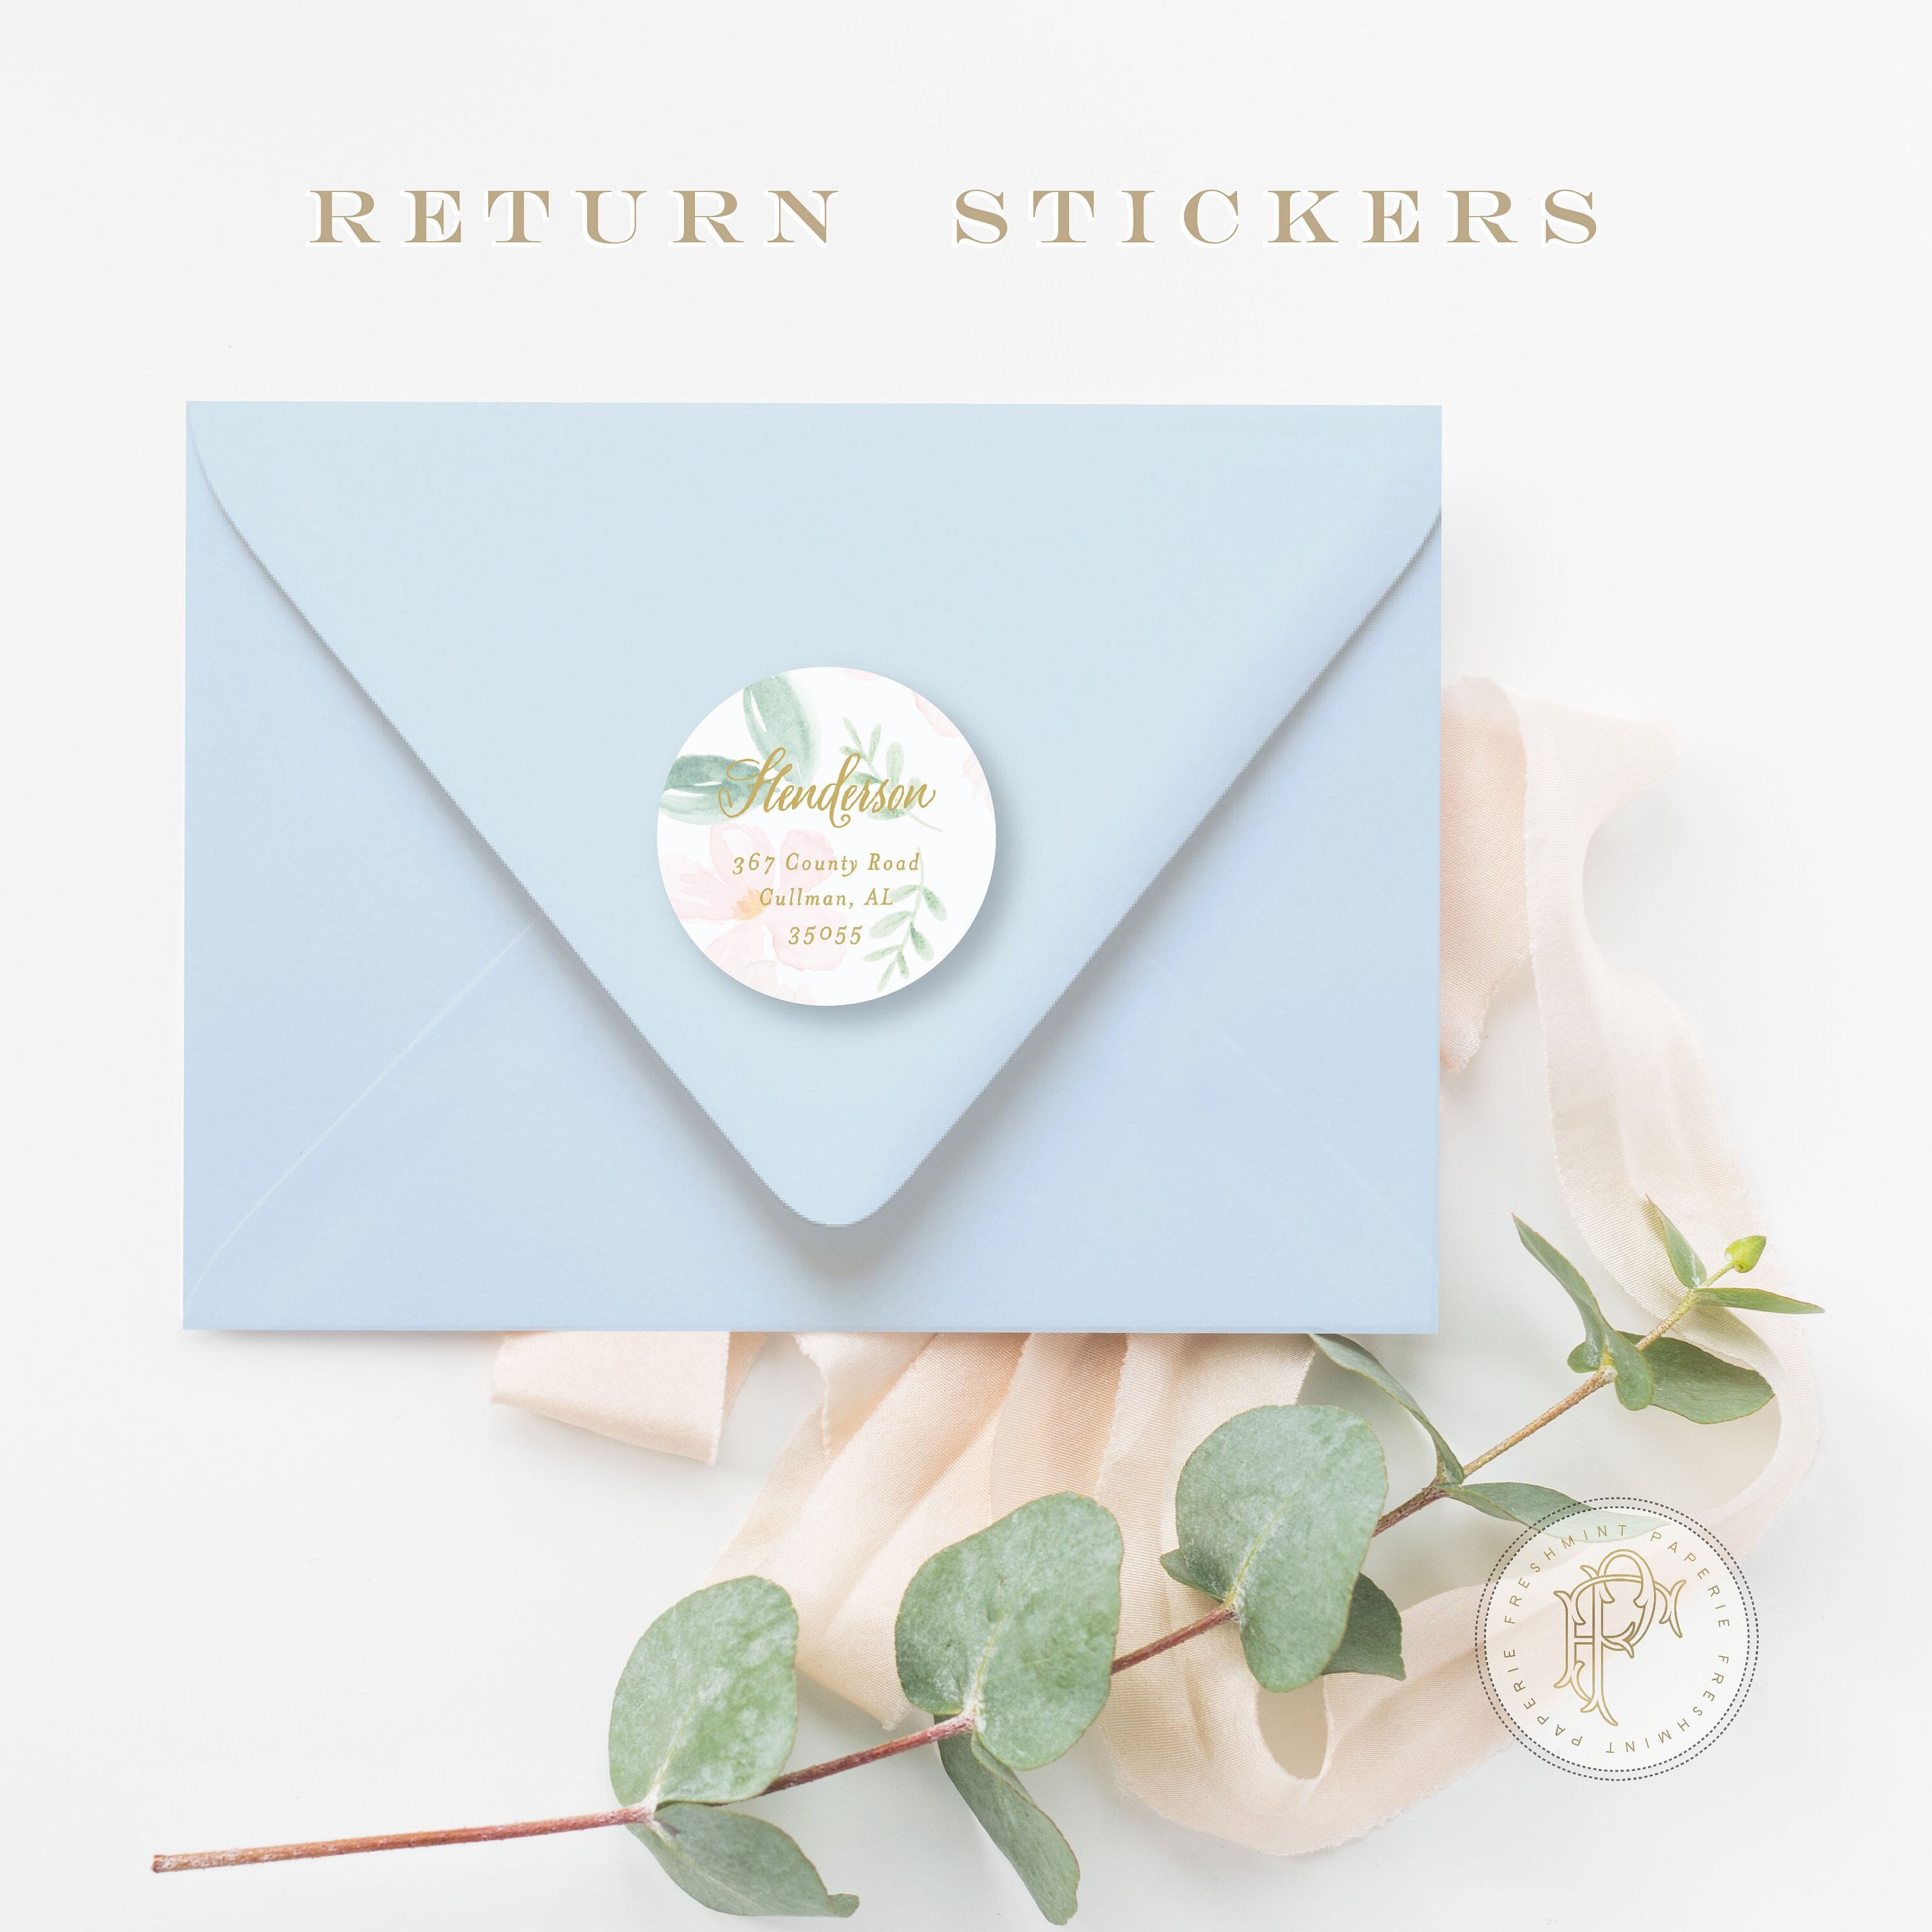 Return Address Stickers to MATCH Any Invitation in Our Shop ADD